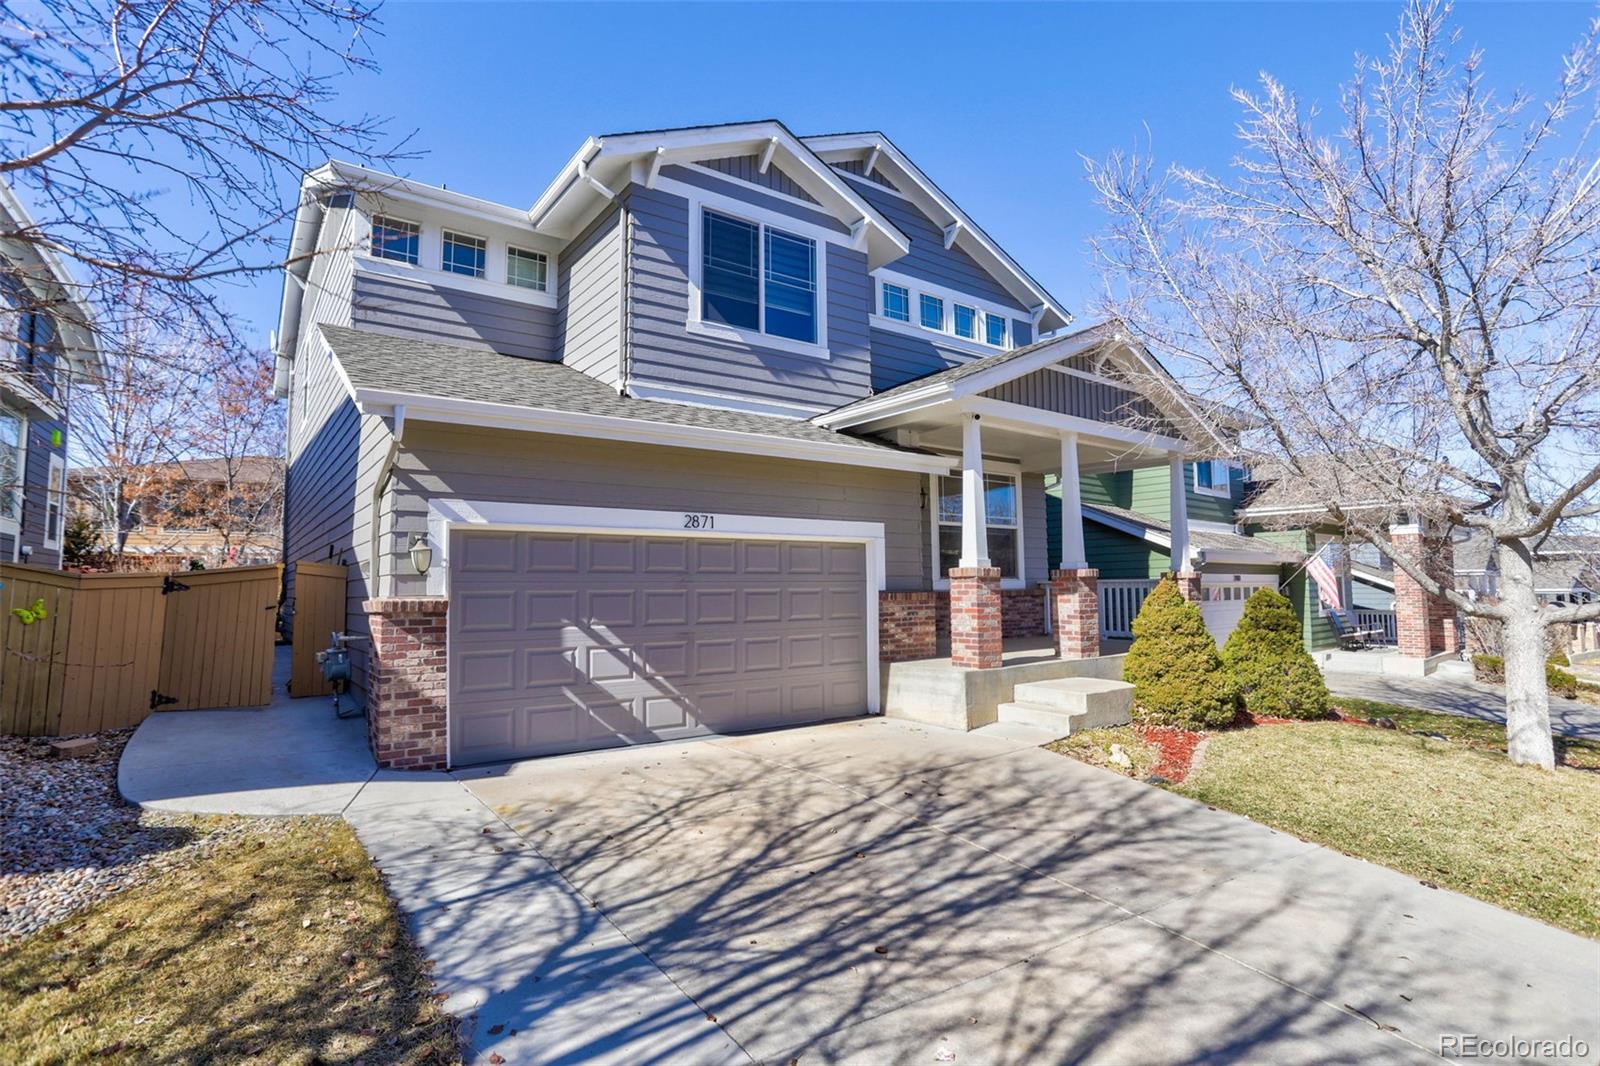 2871  windridge circle, Highlands Ranch sold home. Closed on 2024-04-12 for $800,000.